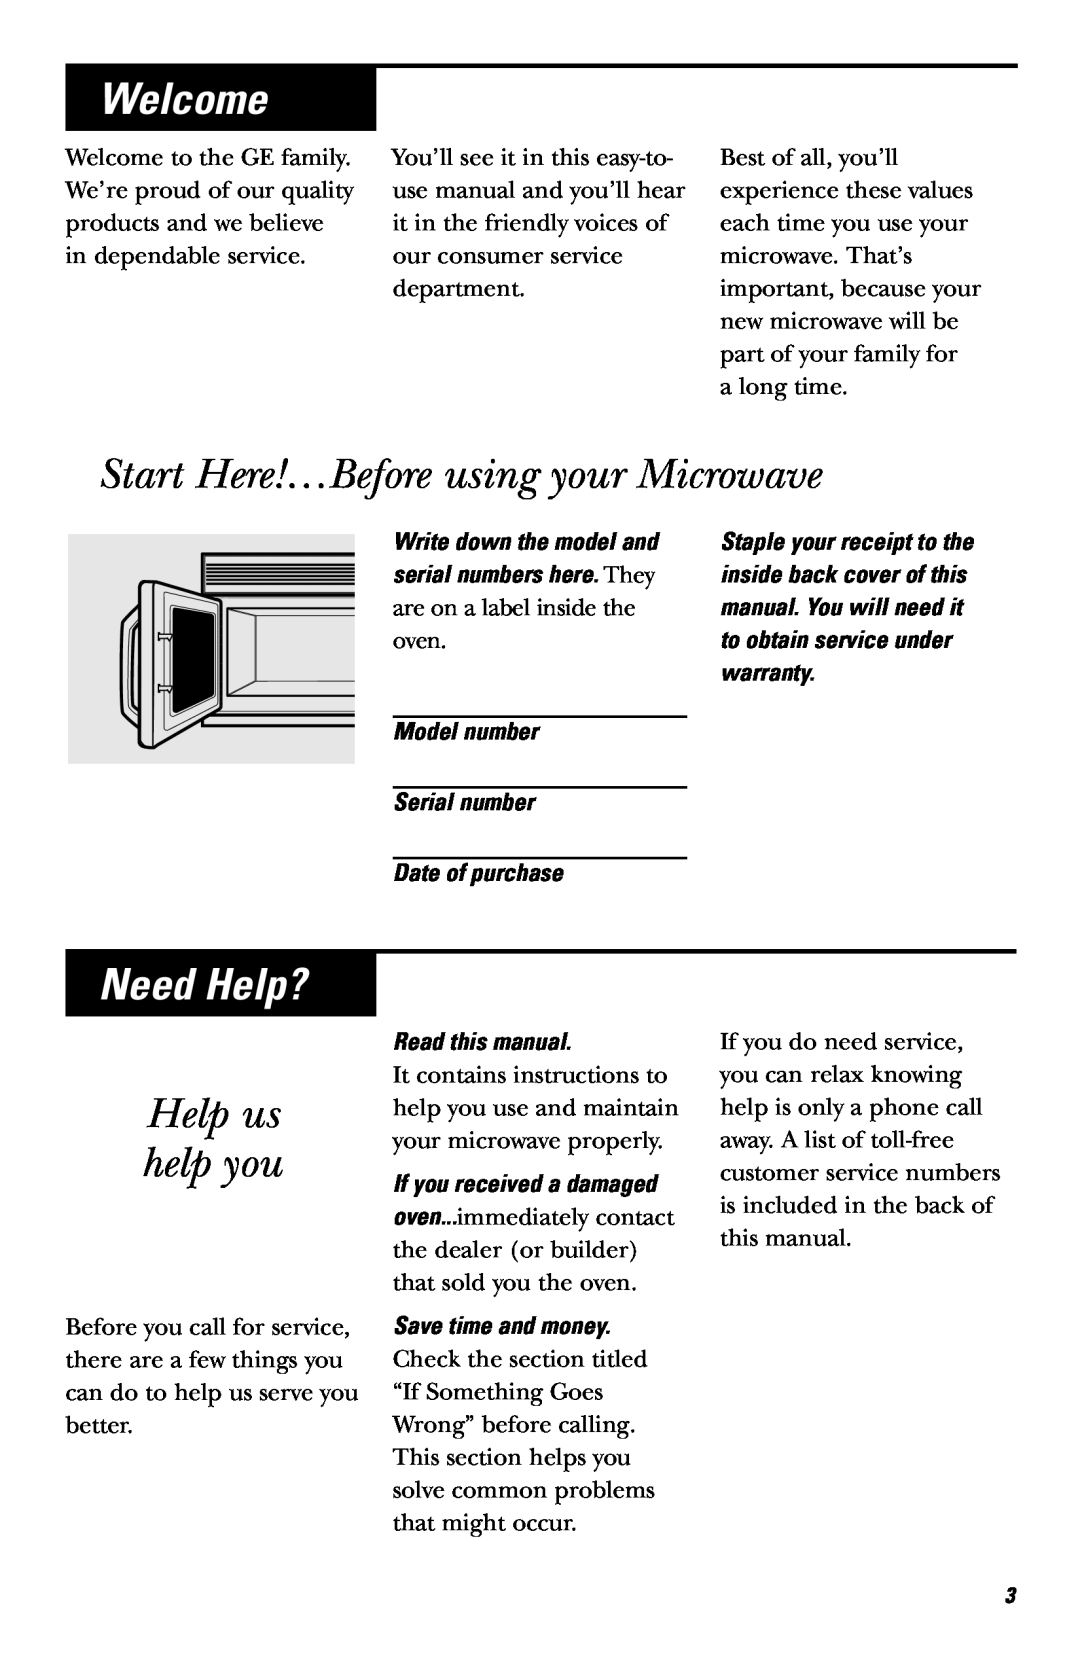 GE JVM1640AB owner manual Welcome, Start Here!…Before using your Microwave, Need Help?, Help us help you, Read this manual 